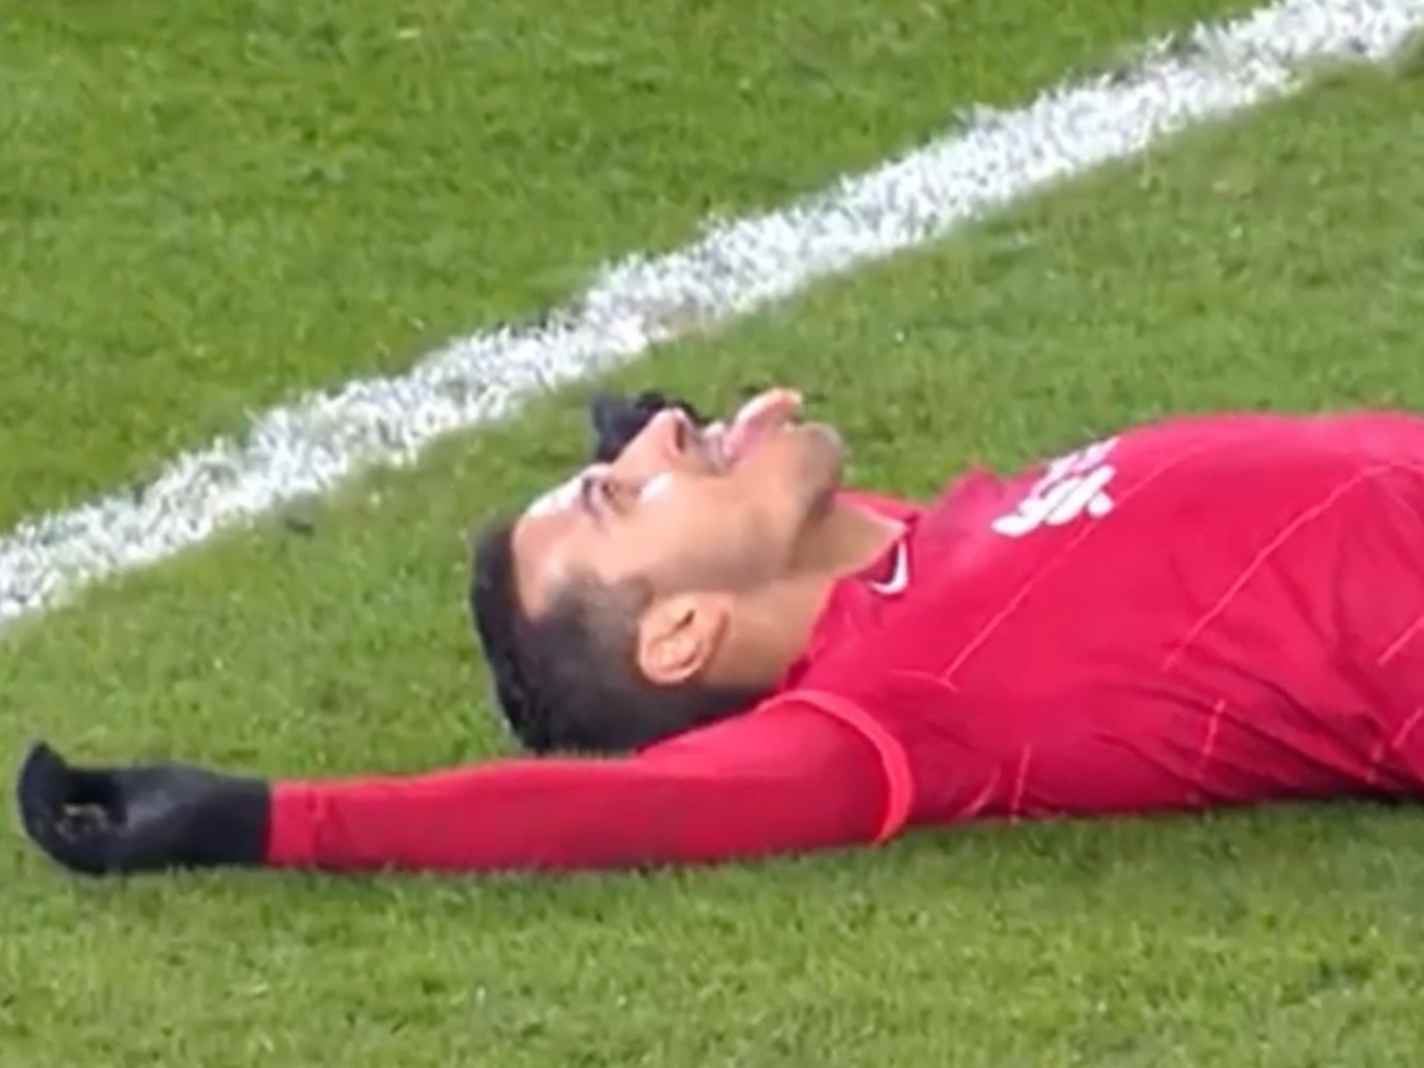 Thiago Alcantara lying on pitch after producing an outrageous overhead kick attempt which nearly went in